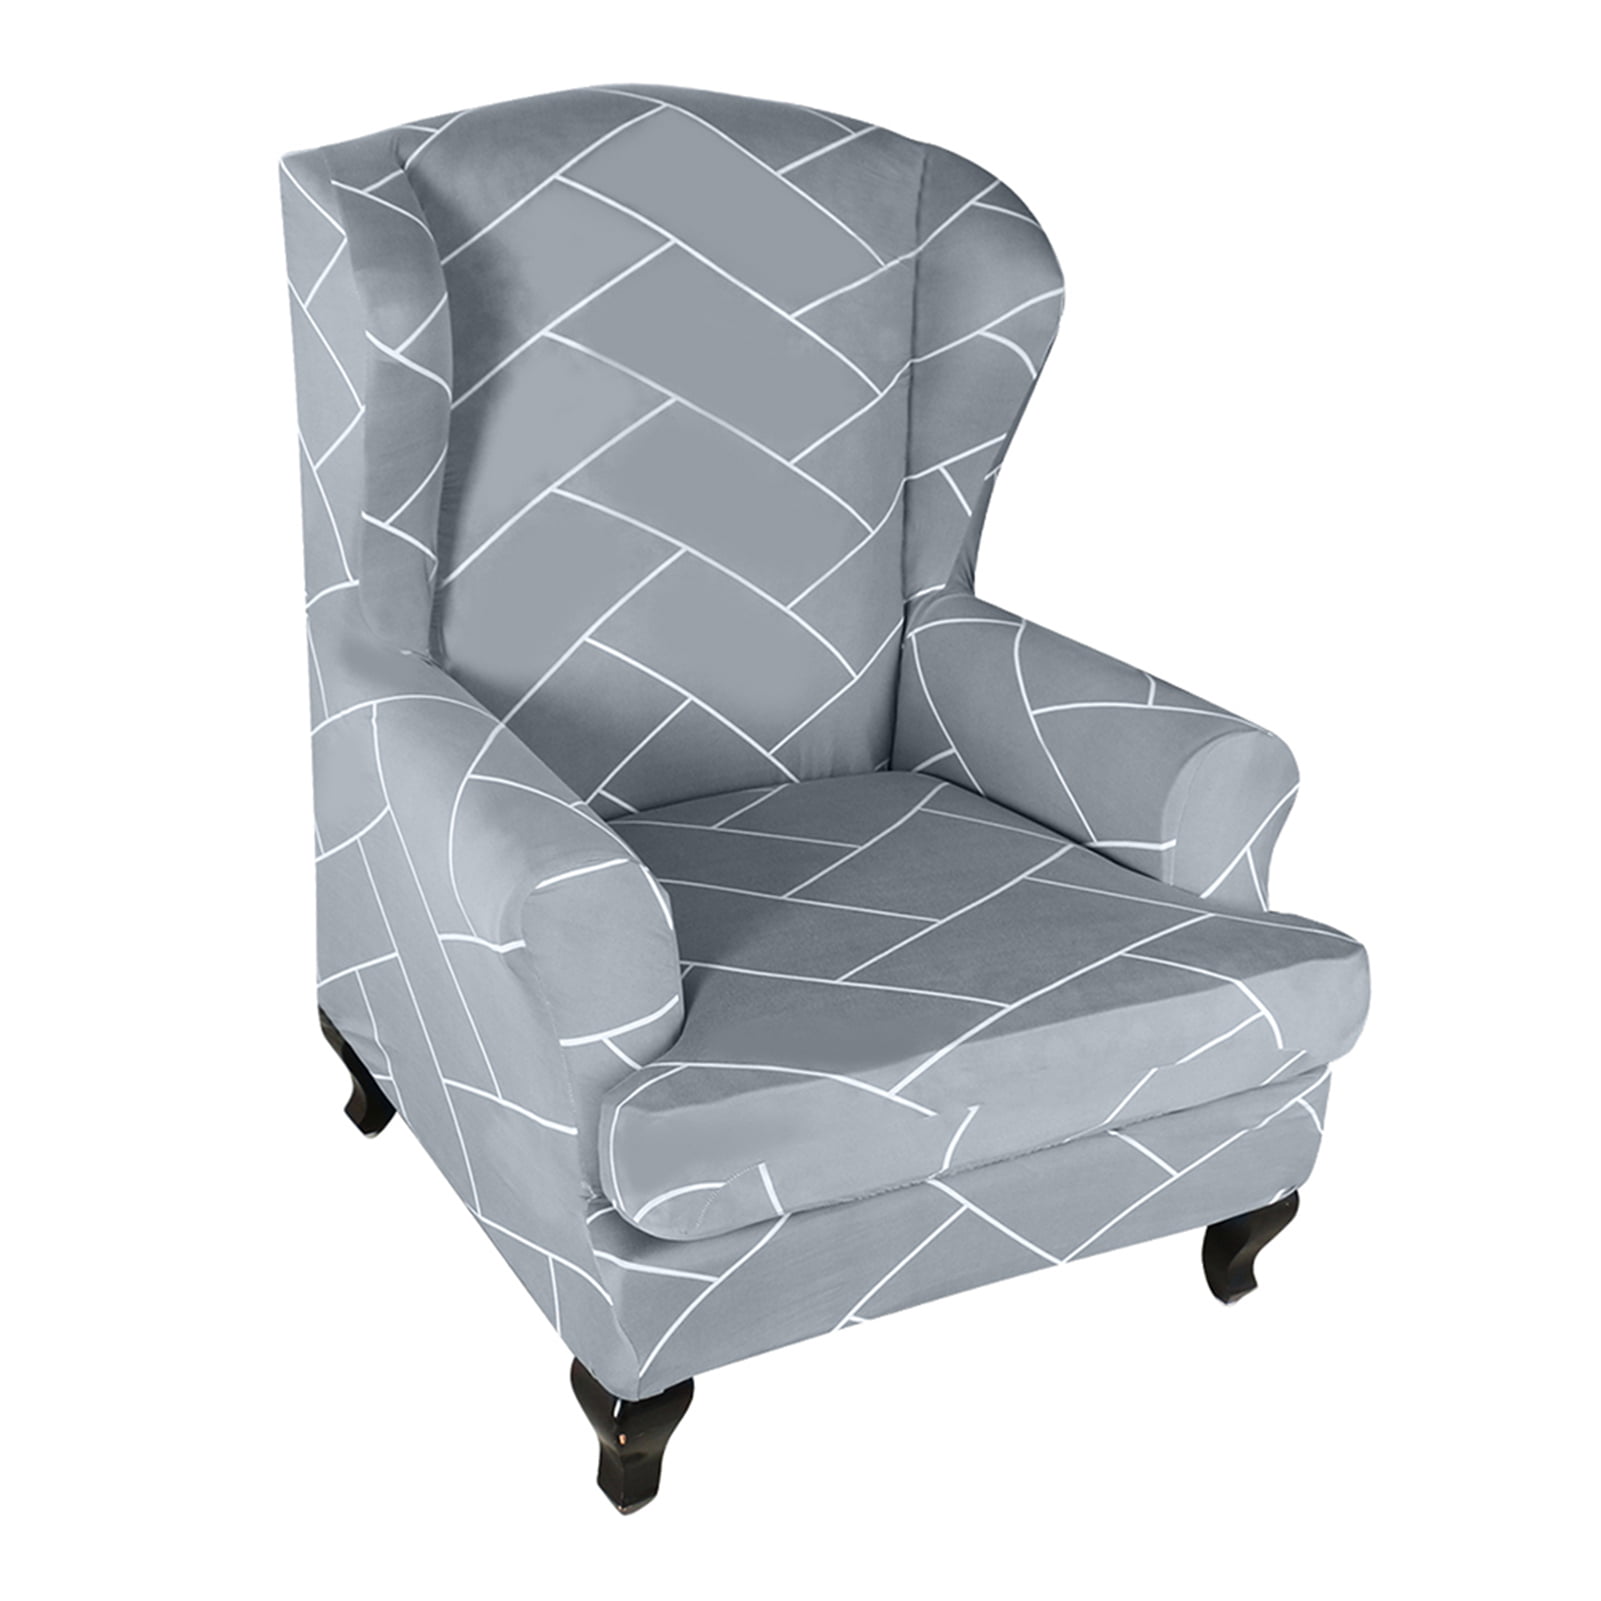 Details about   Removable Elastic Stretch Slipcovers Home Dining Chair Seat Covers Soft Grey UK 